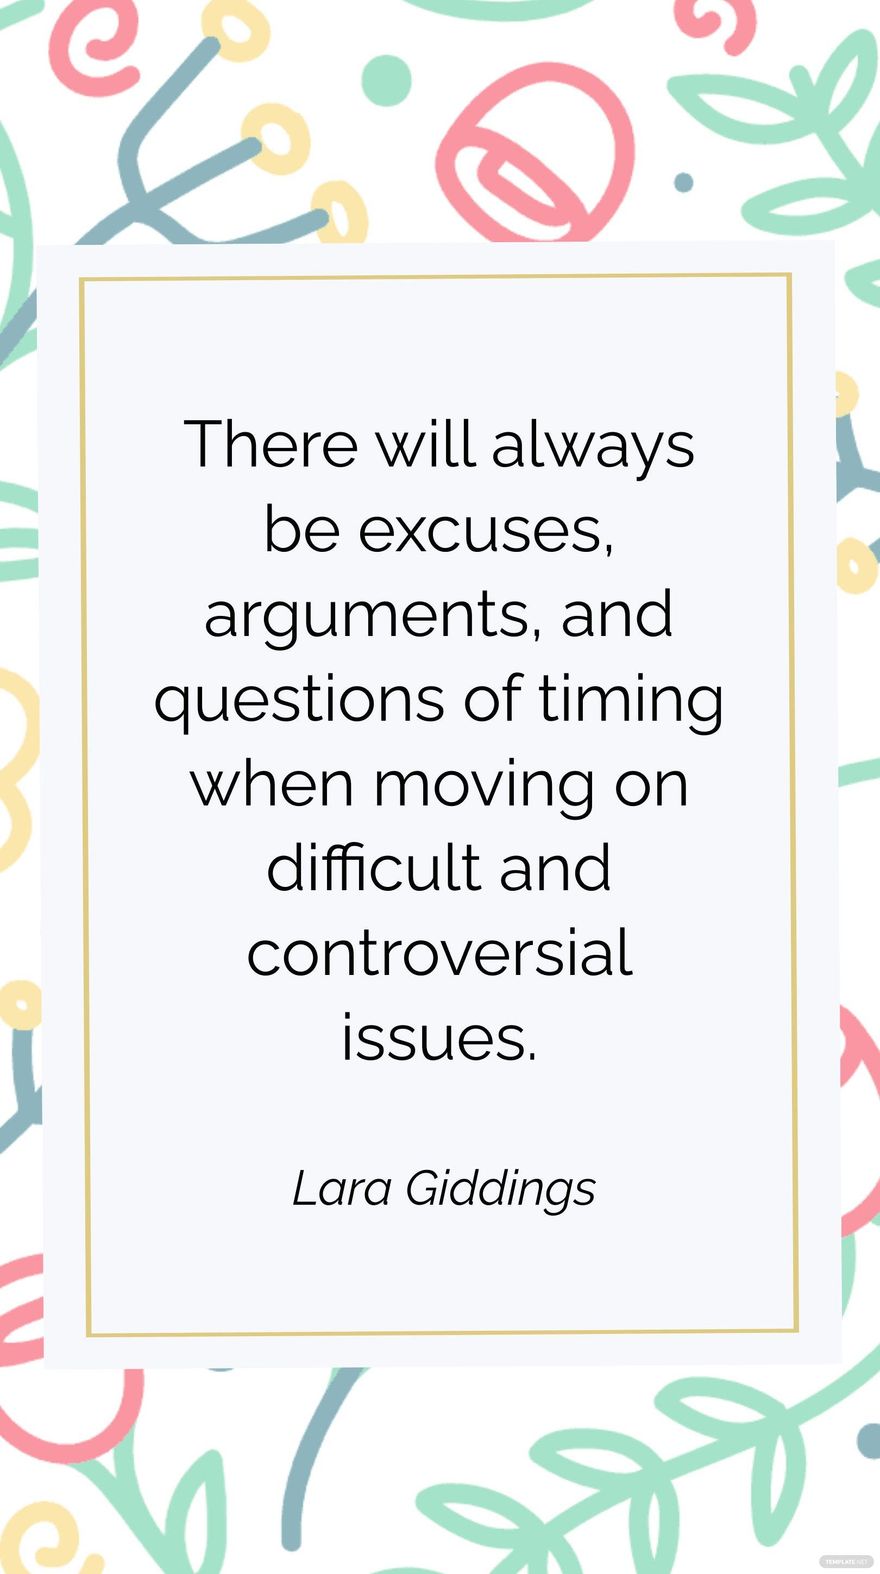 Free Lara Giddings - There will always be excuses, arguments, and questions of timing when moving on difficult and controversial issues.